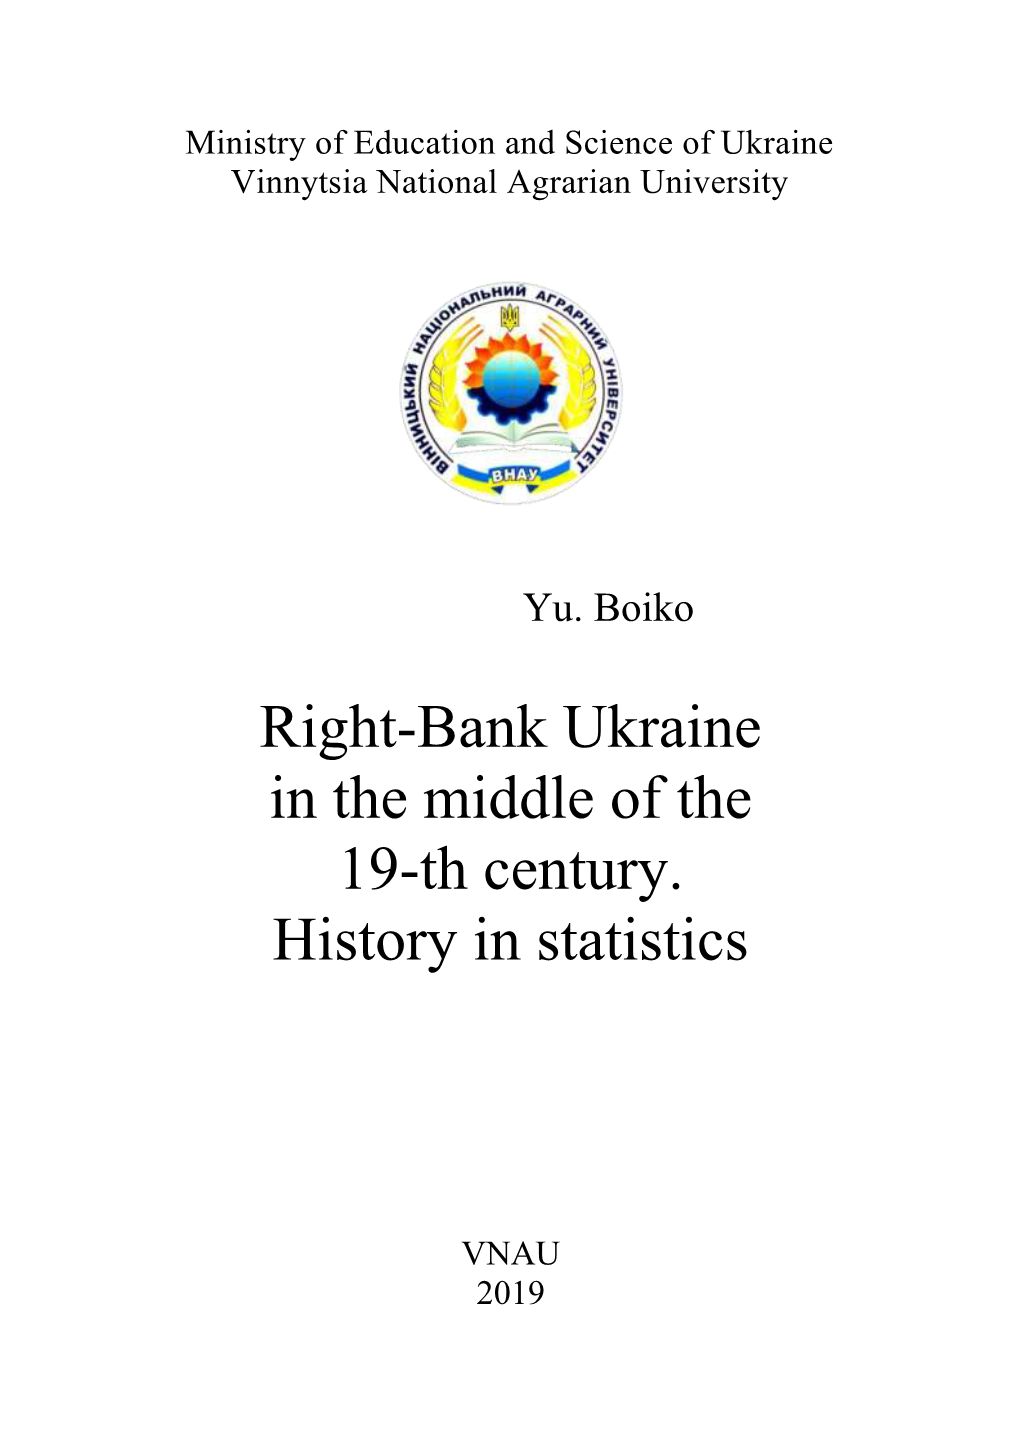 Right-Bank Ukraine in the Middle of the 19-Th Century. History in Statistics